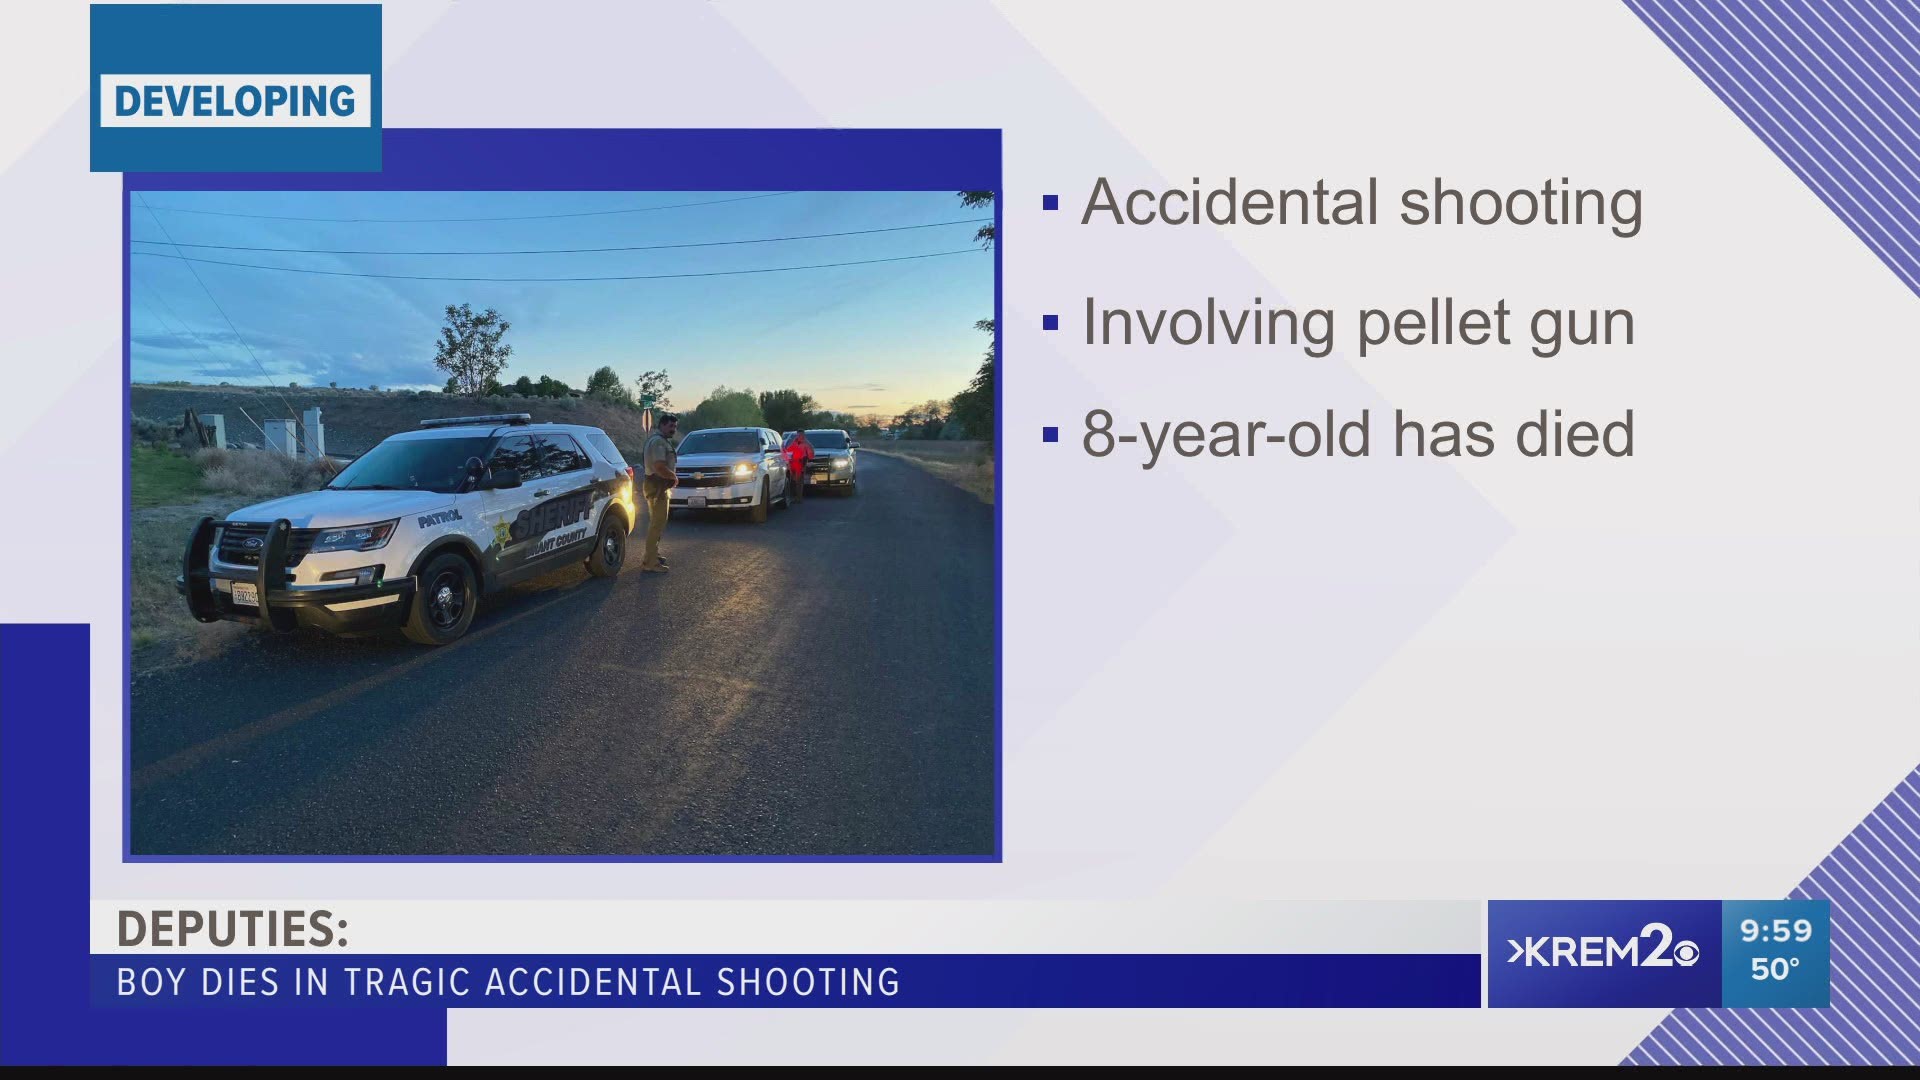 Authorities are investigating the shooting as a "terrible accident," Kyle Foreman with the Grant County Sheriff's Office said.